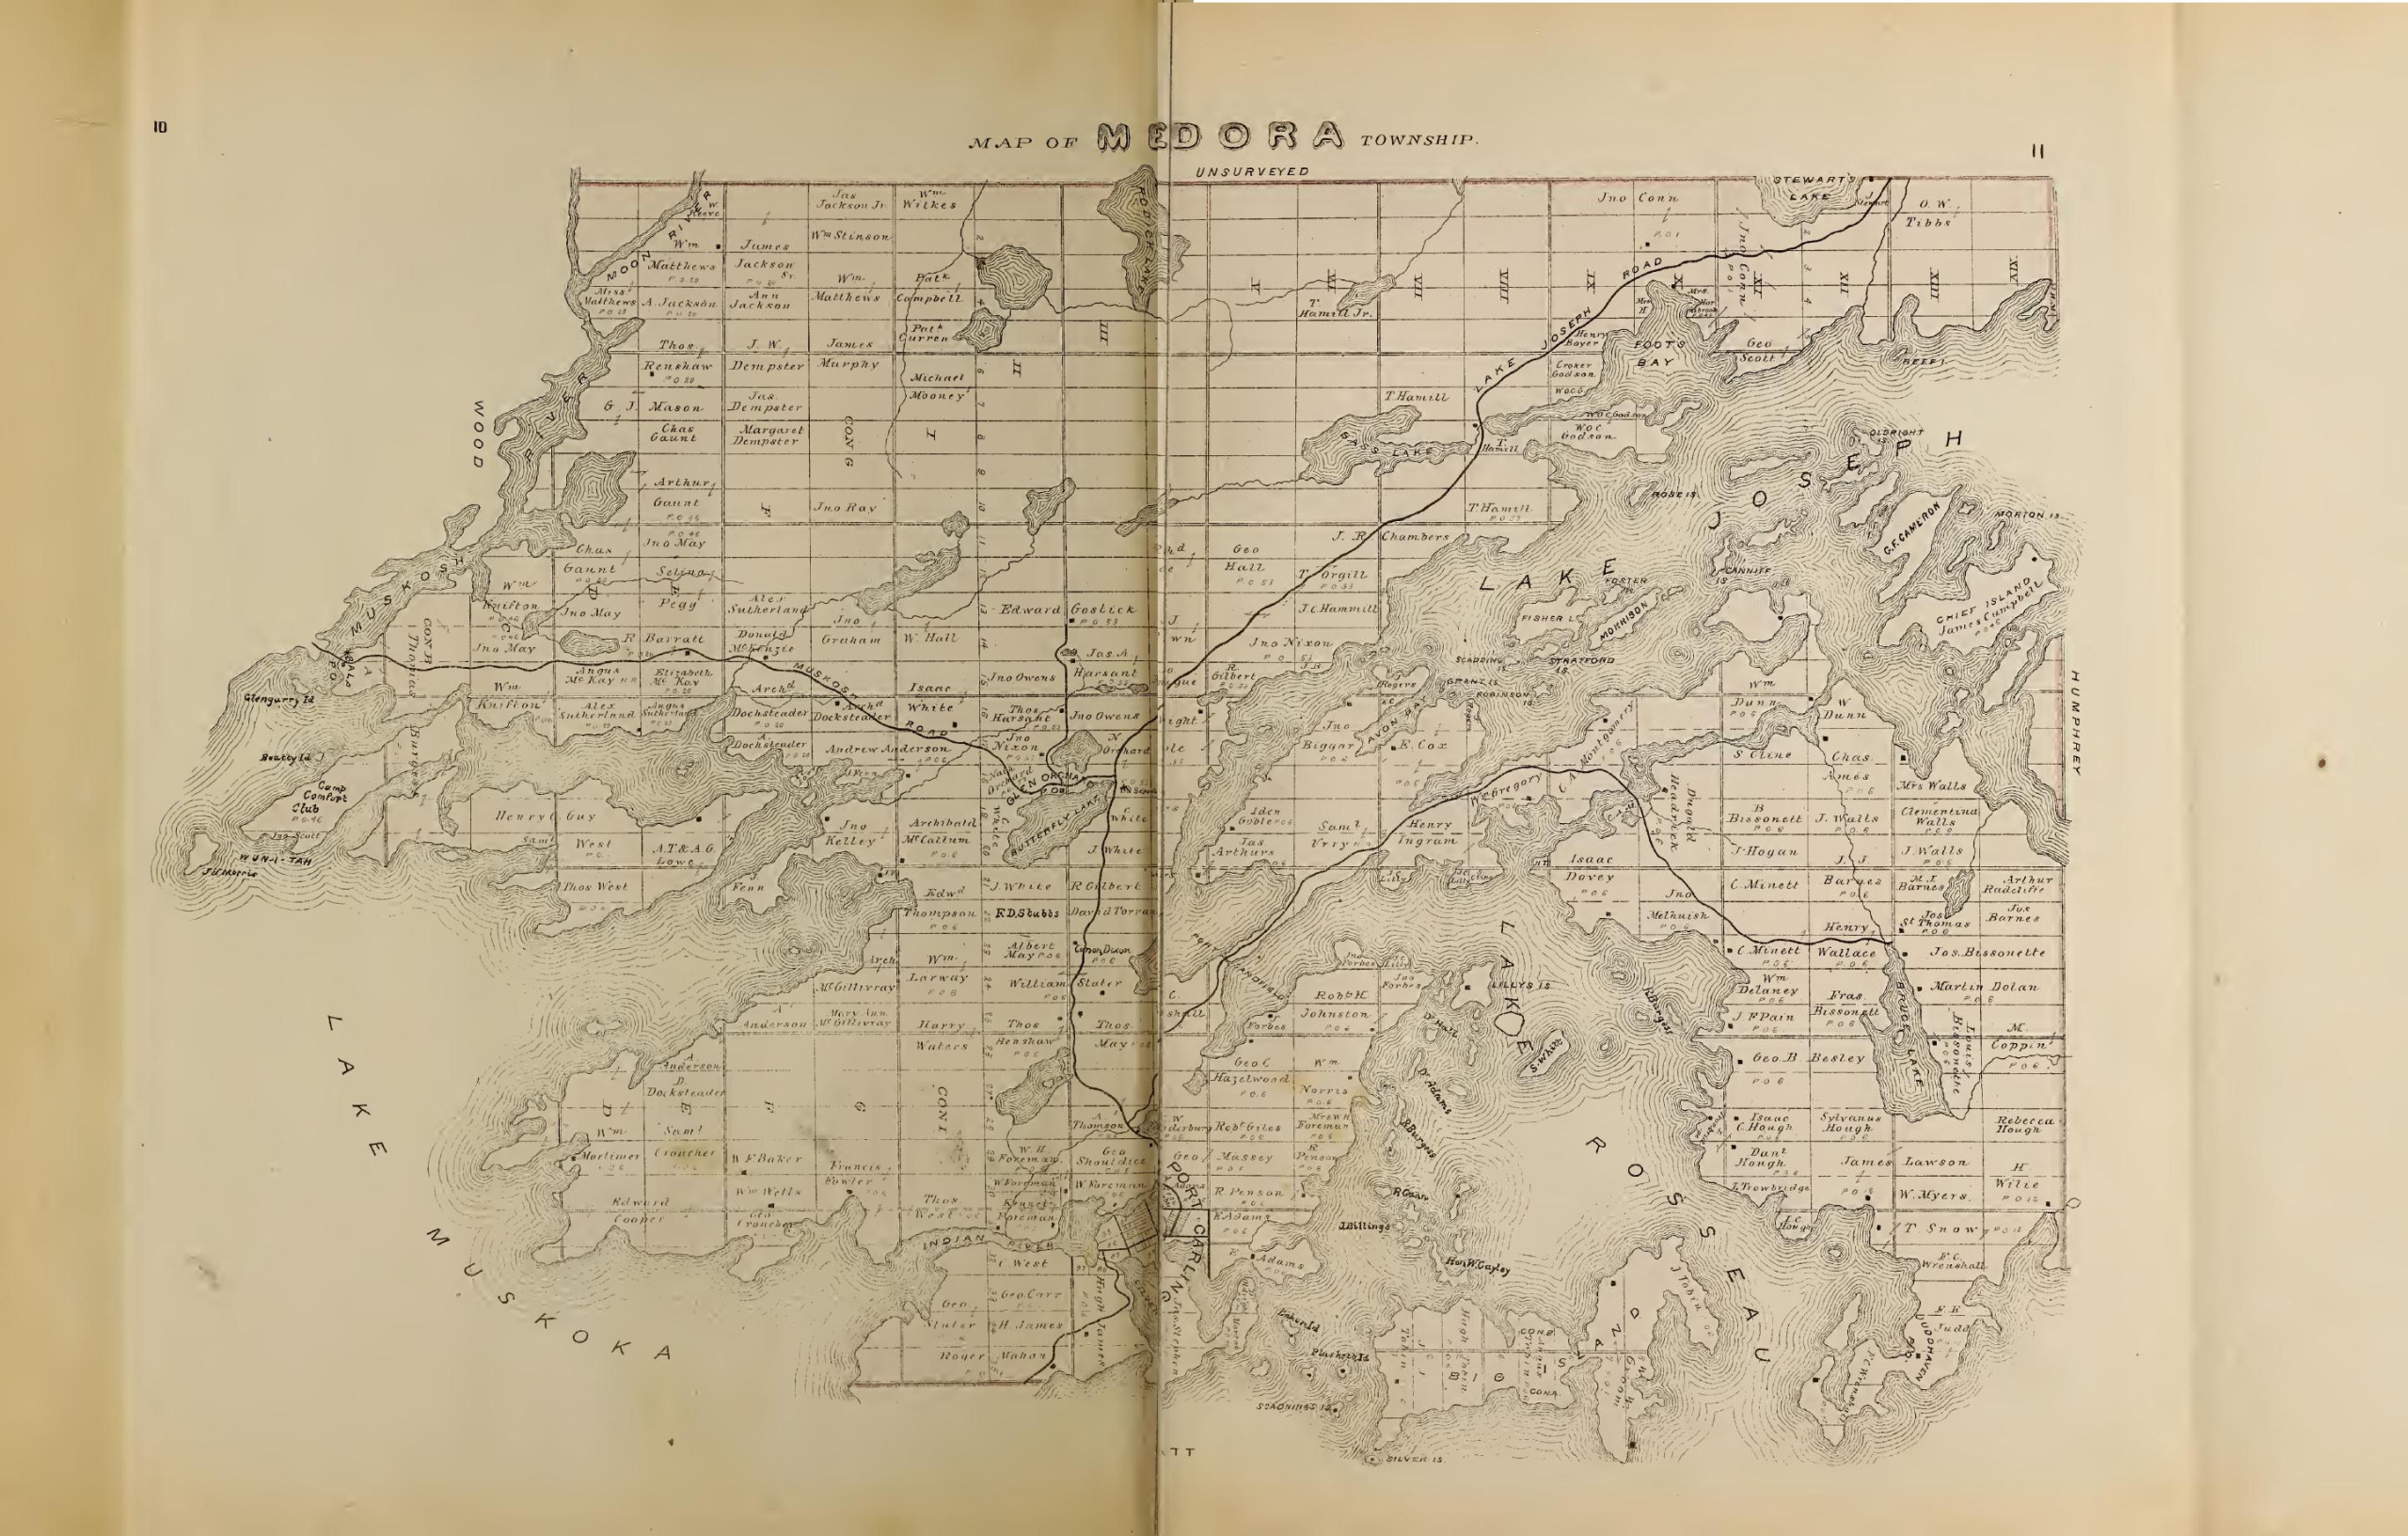 Historical map showing Concessions and Lots for medora Township